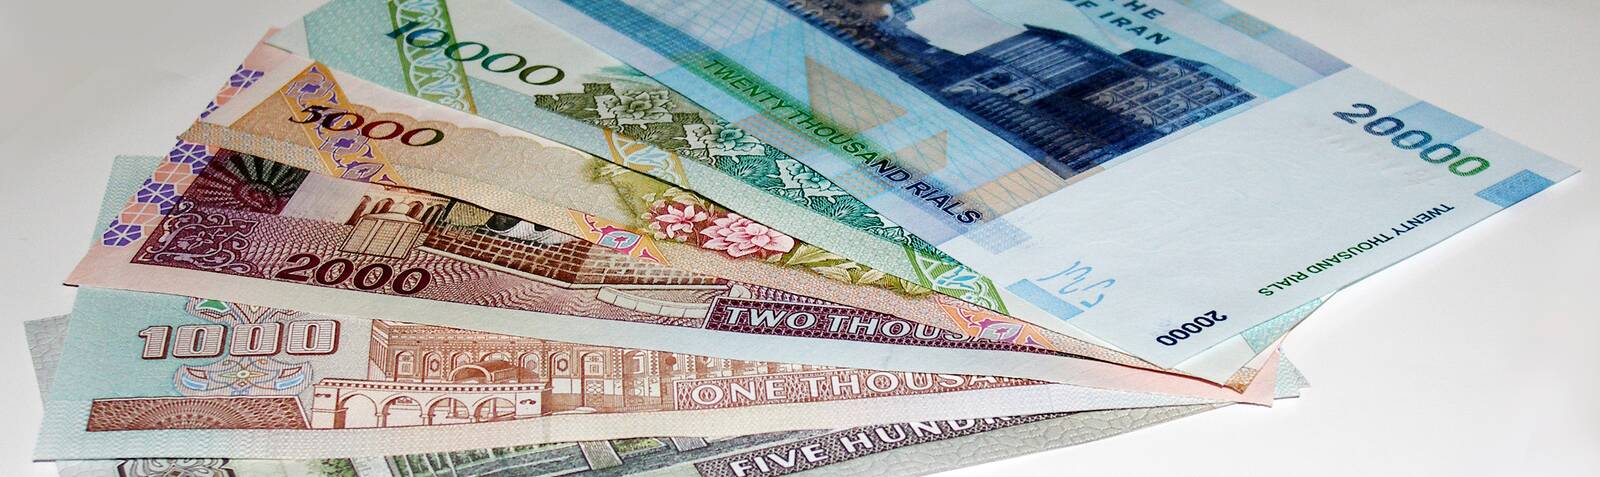 Currency in Iran 